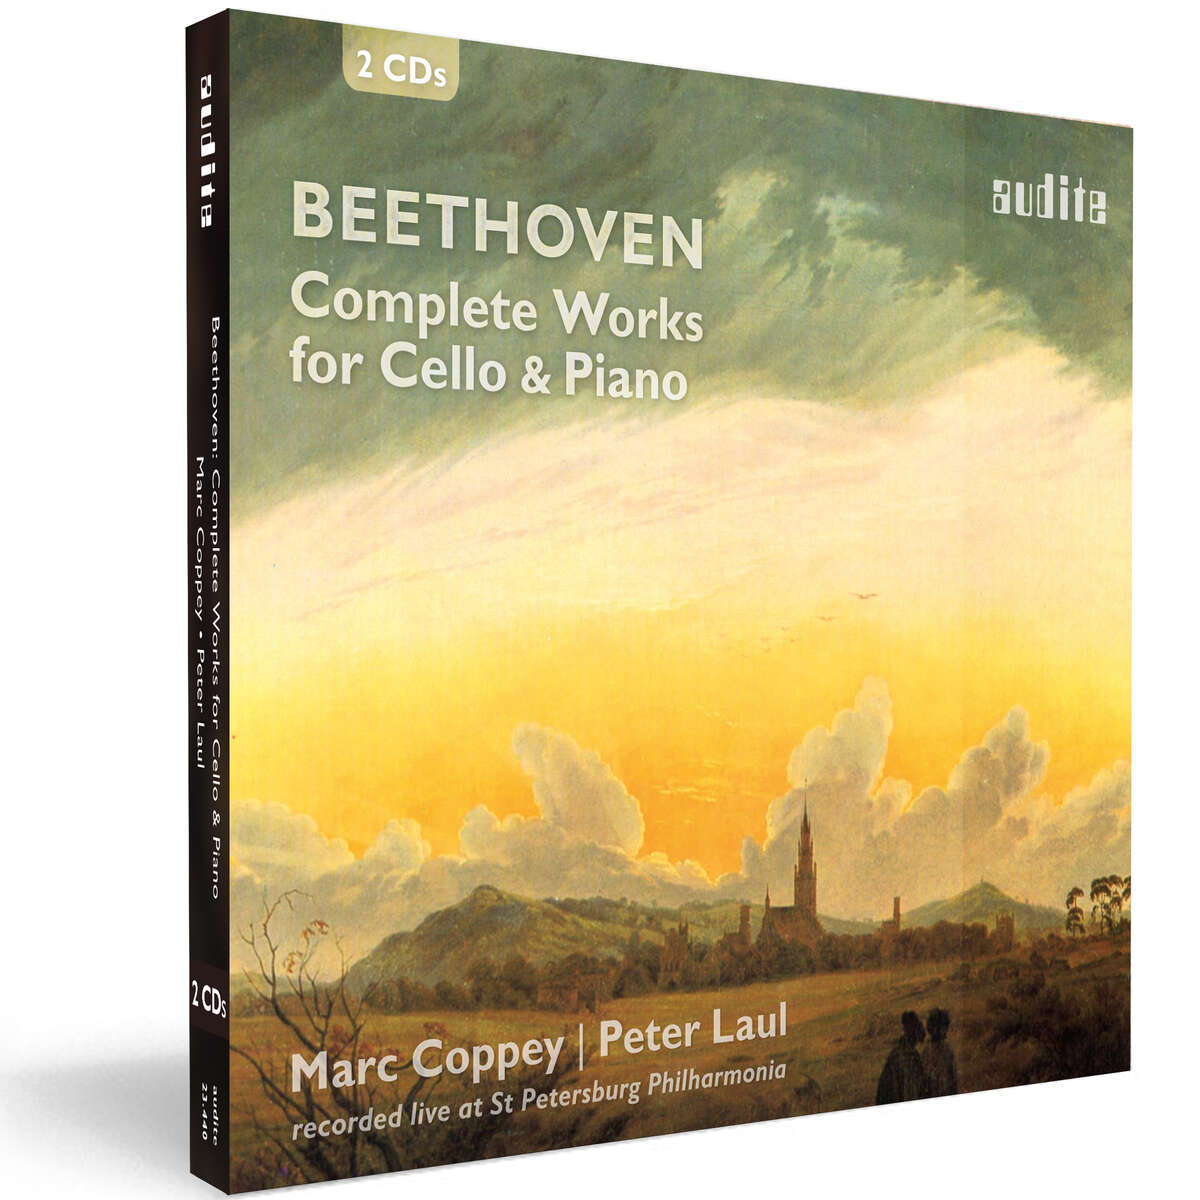 Works　|...　for　Beethoven:　Coppey　and　Piano_M.　Cello　Complete　audite